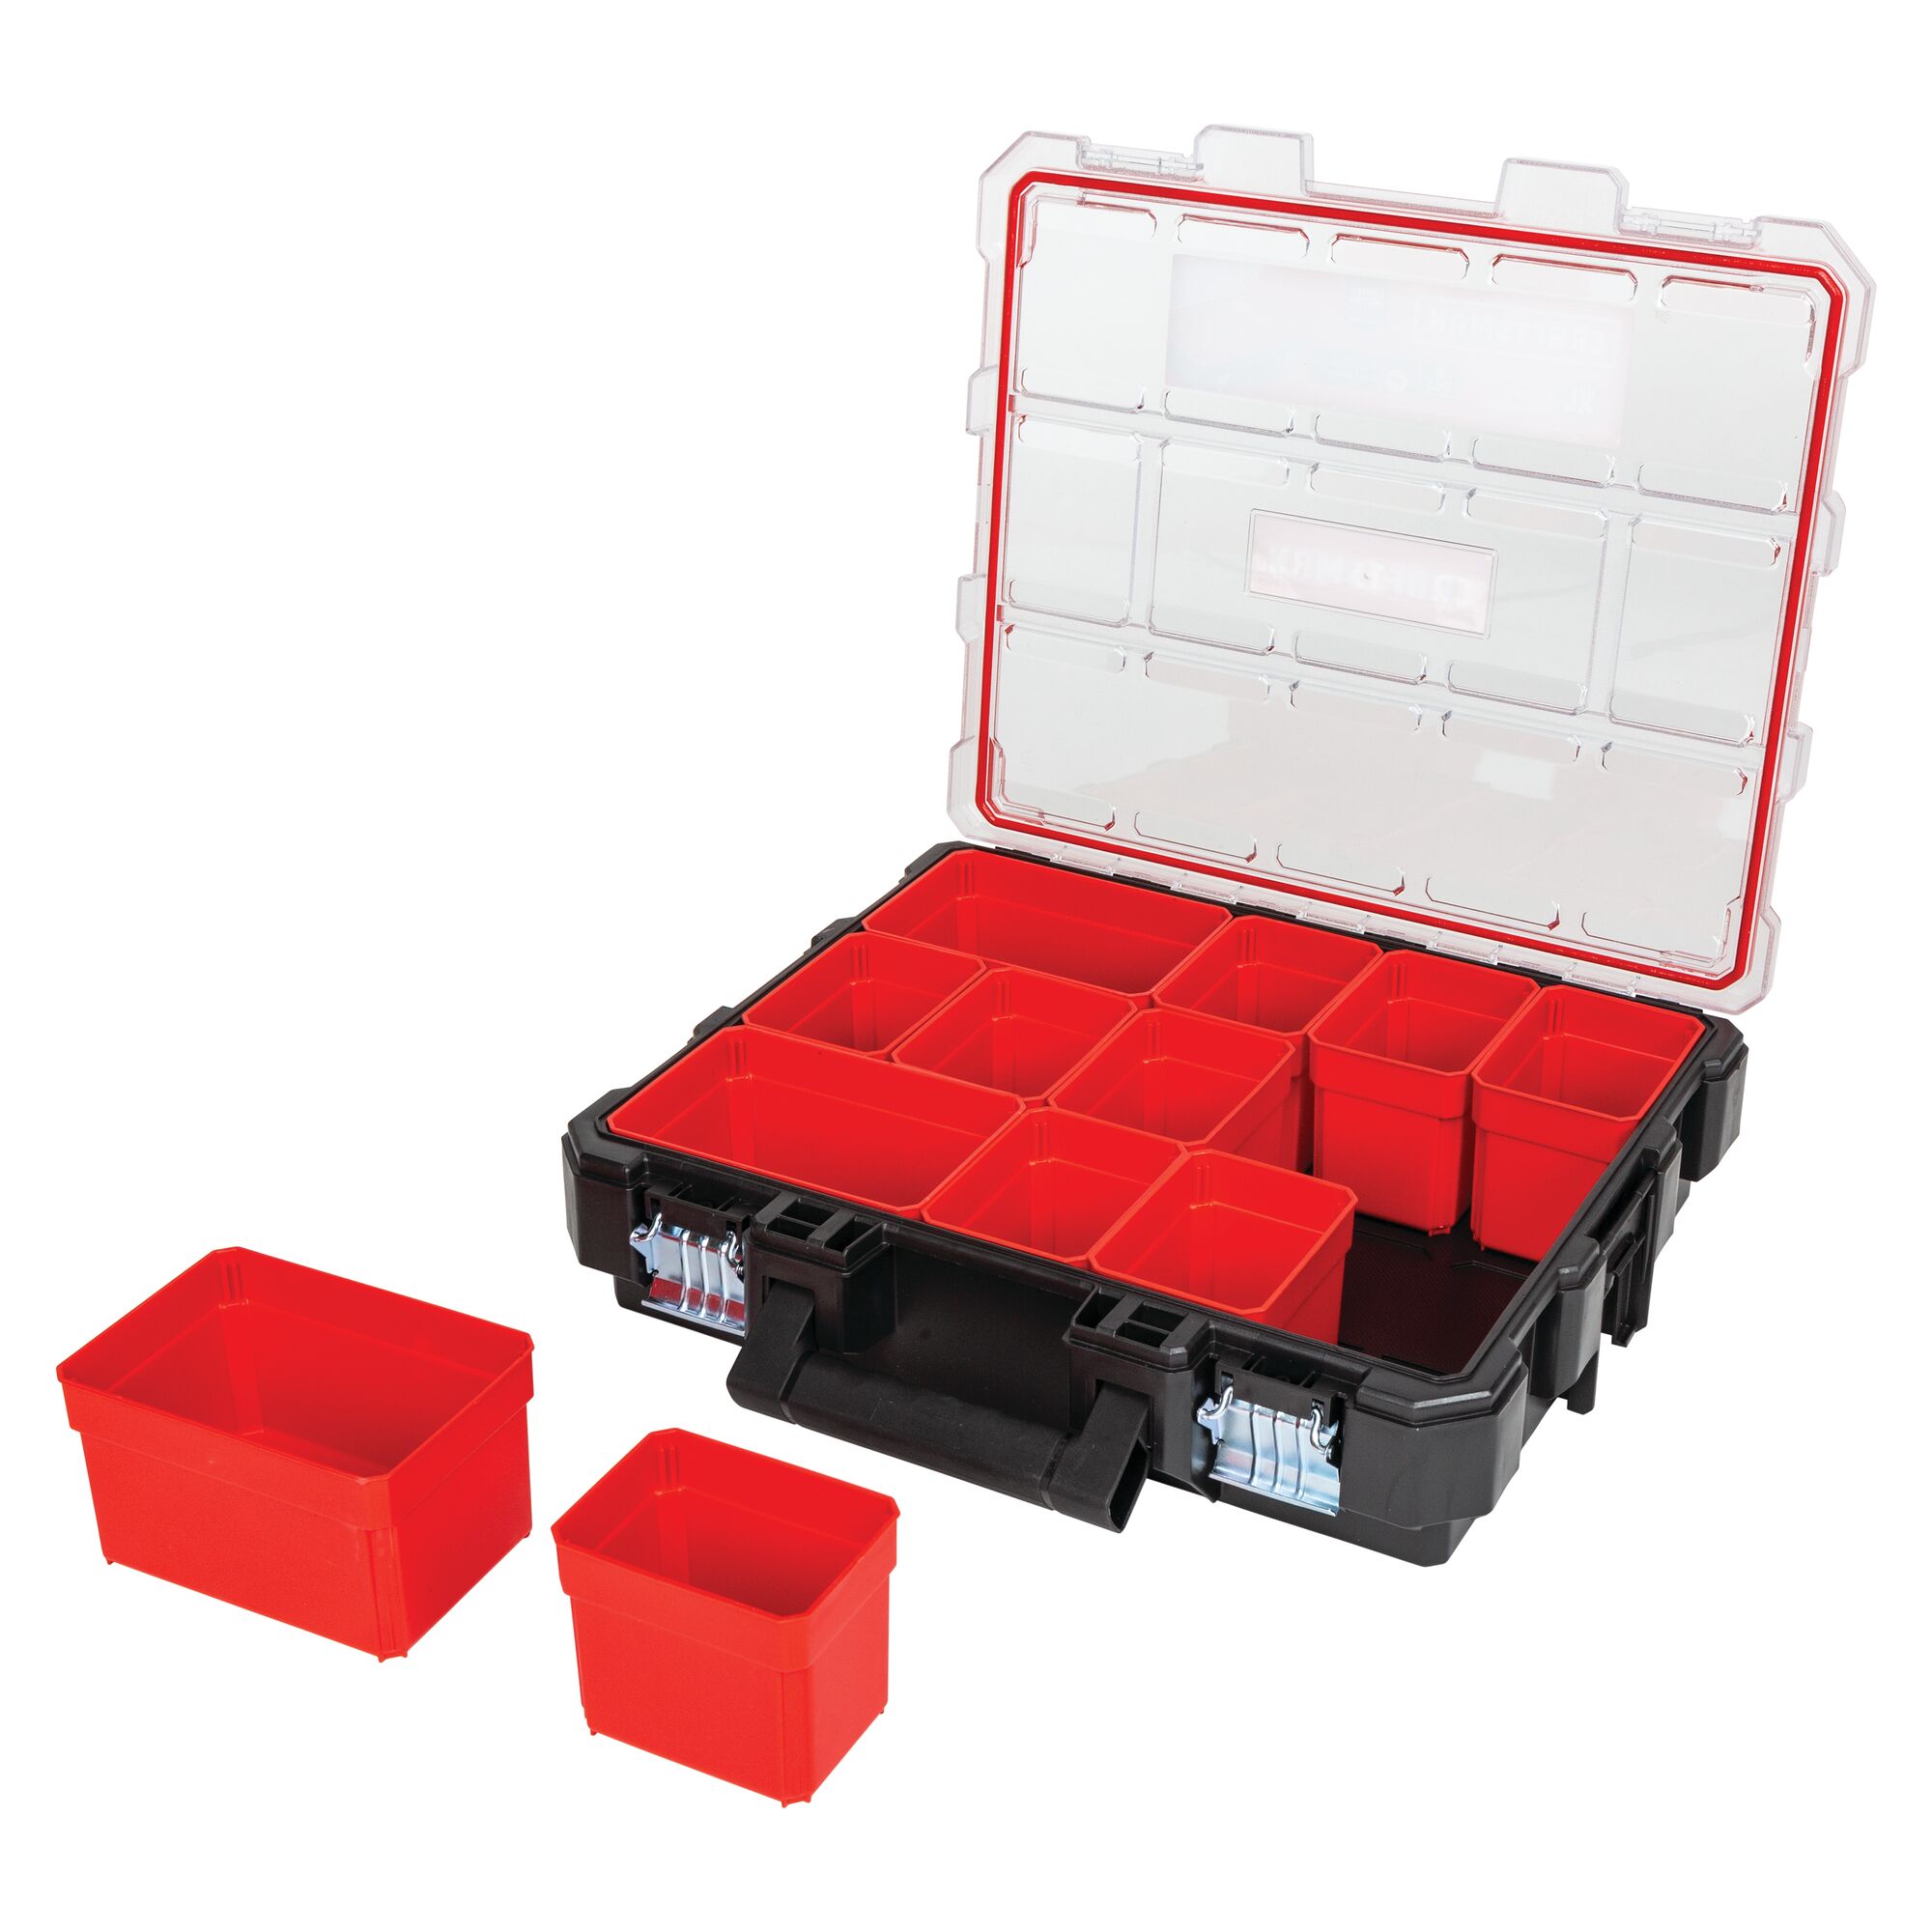 View of CRAFTSMAN Storage: Part Organizers highlighting product features